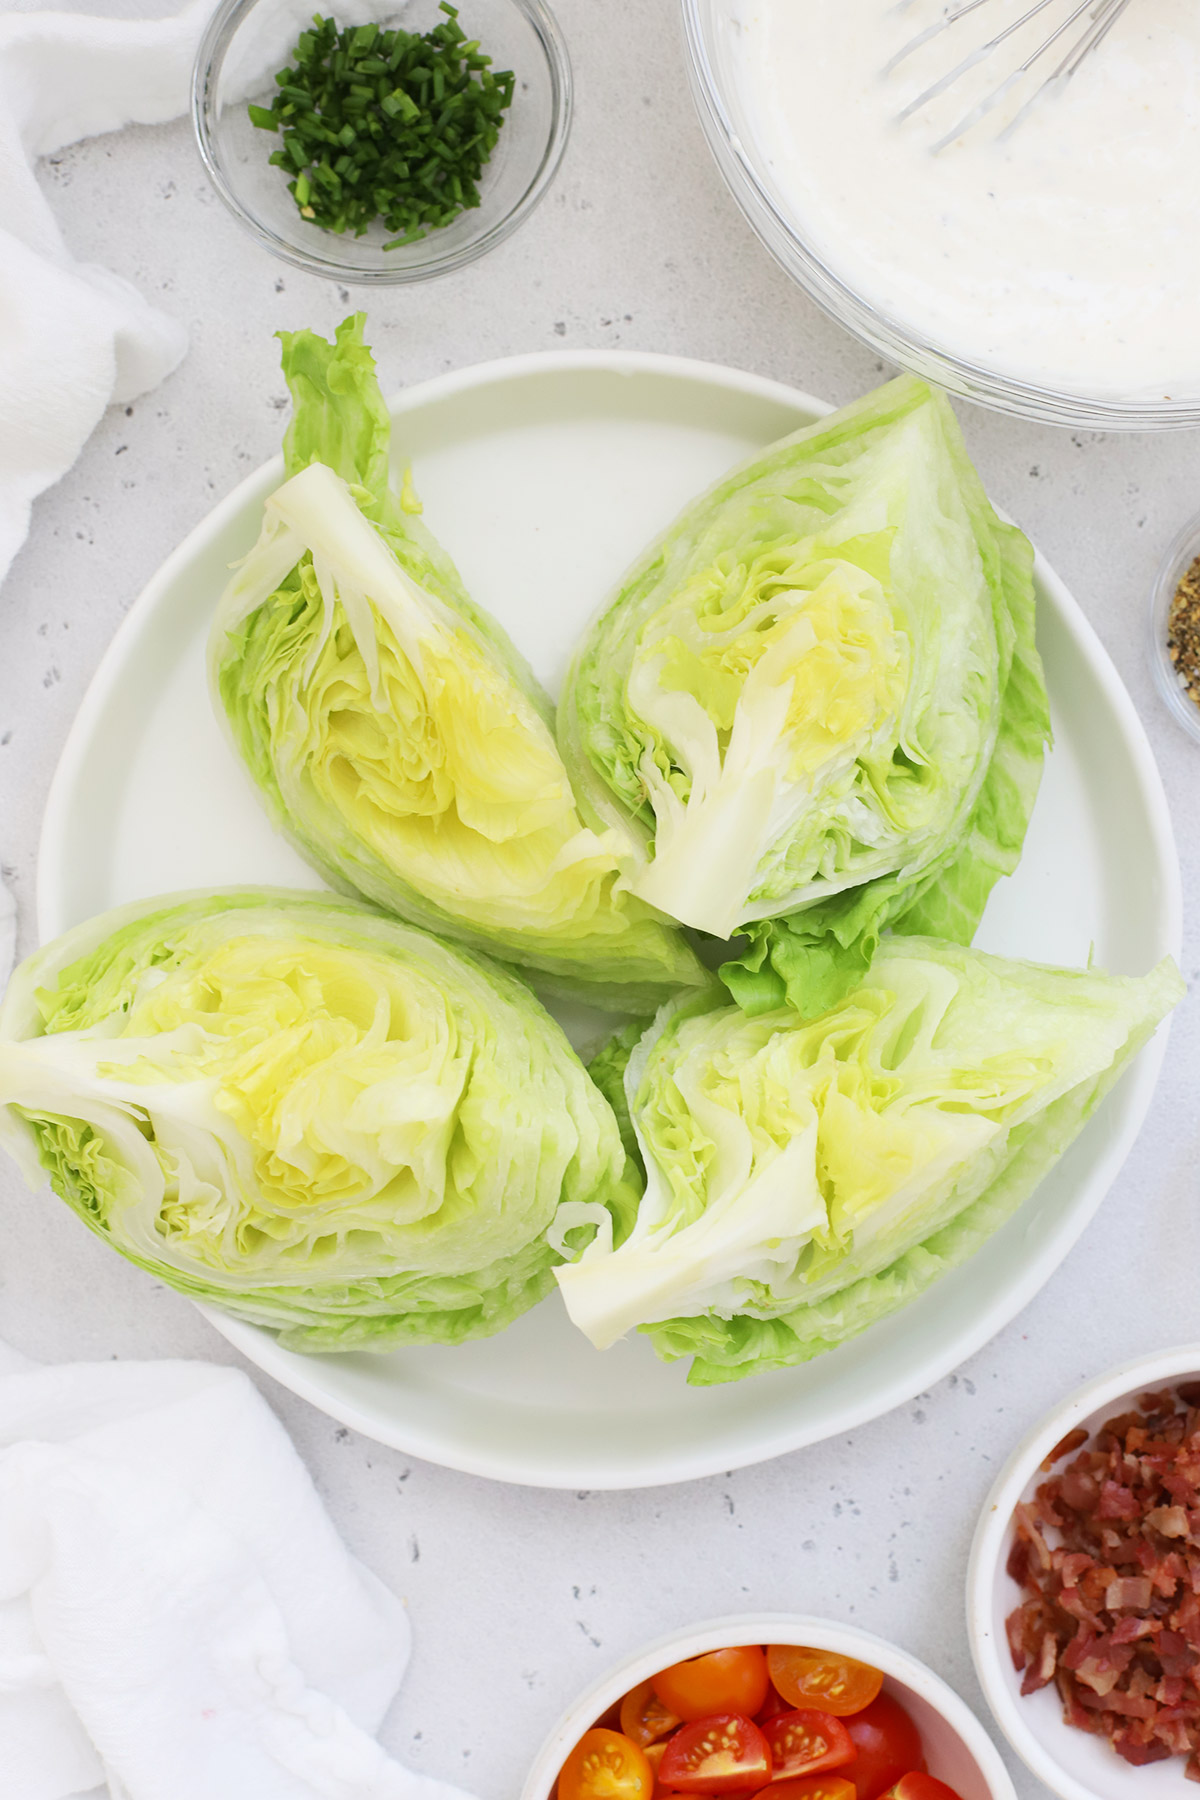 How To Wash And Cut Lettuce For Wedge Salad